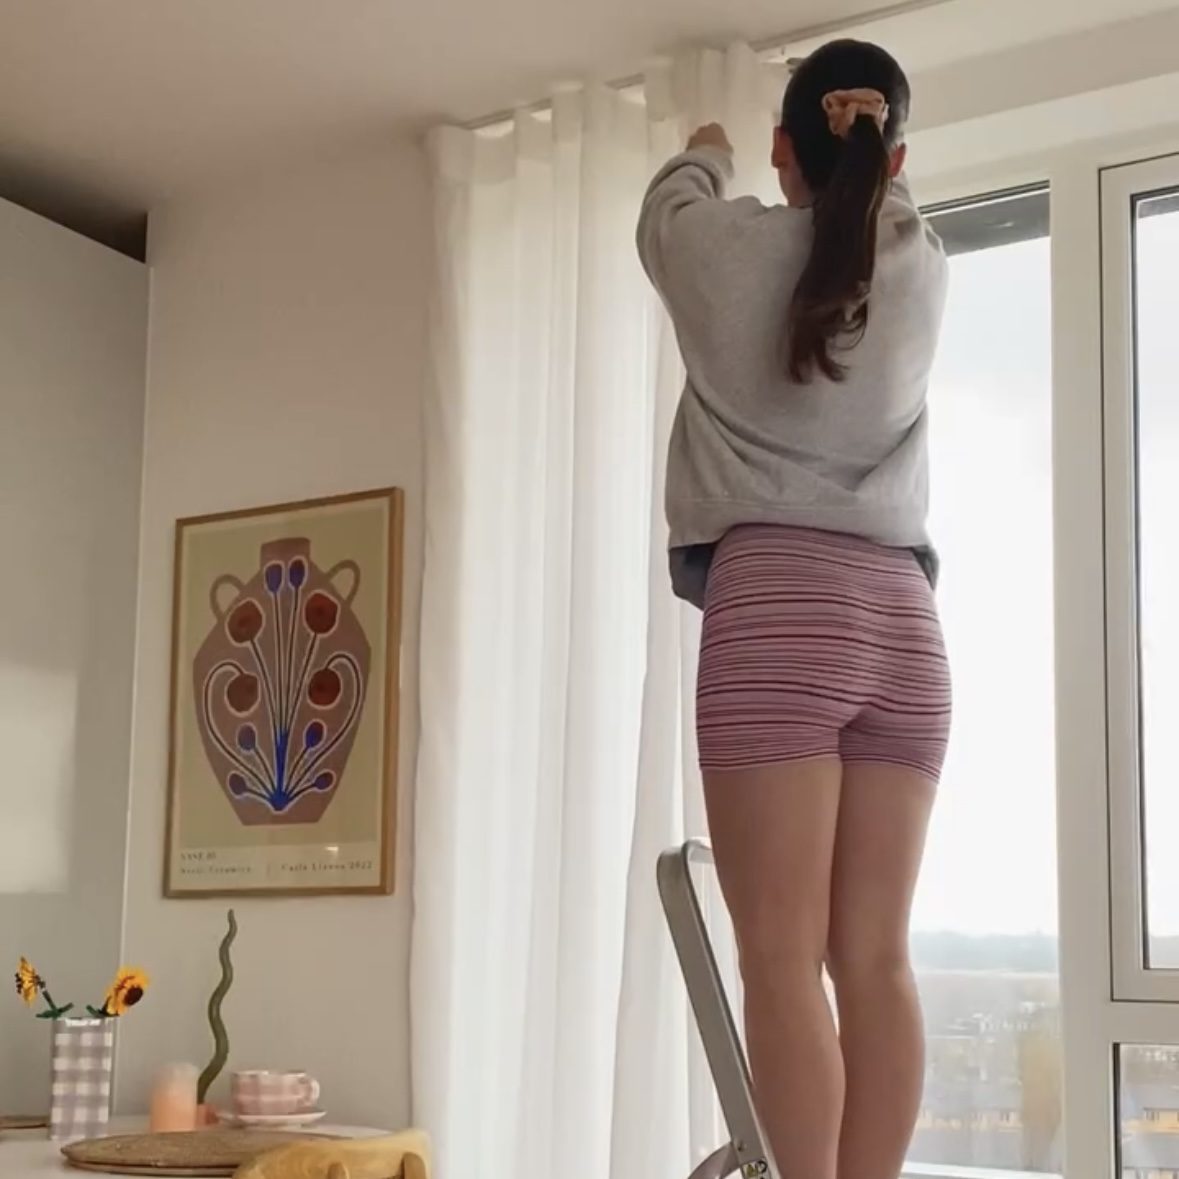 Image of person hanging up curtains.